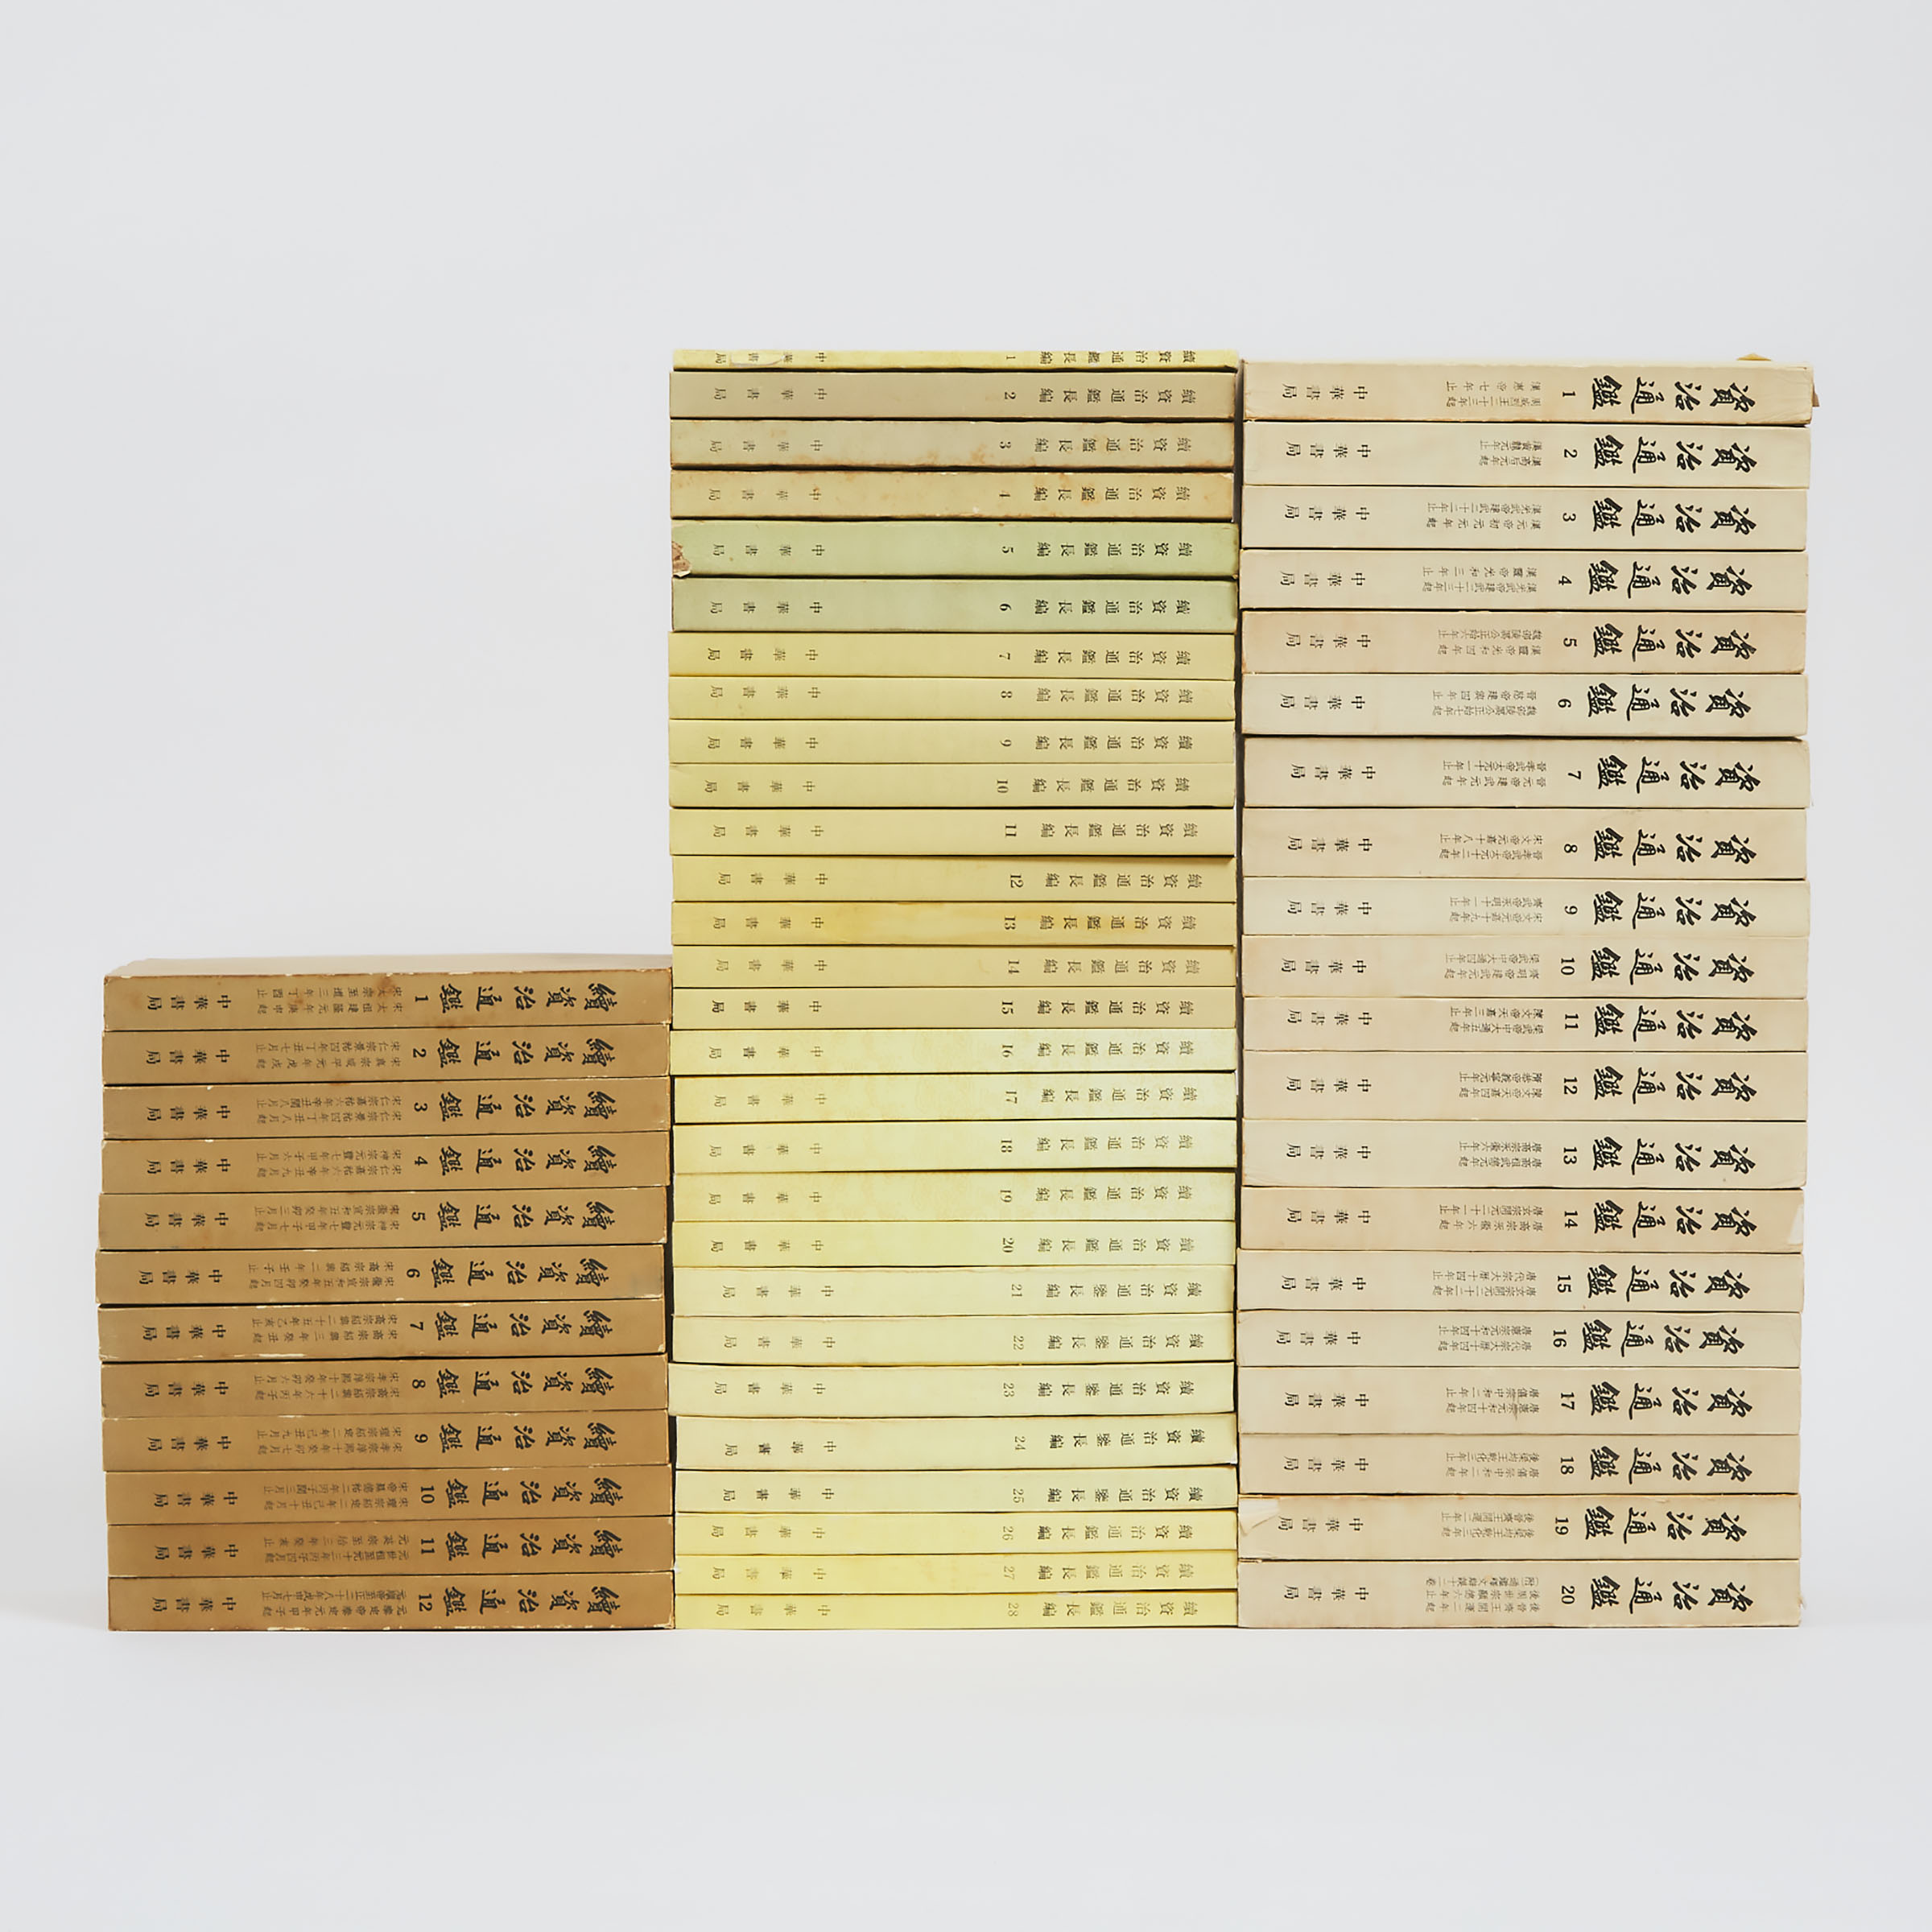 A Complete Set of Twelve 'Zizhi Tongjian', Together With Two Complete Sets of Twelve and Twenty-Eight Volumes of the Addenda, Published by Zhonghua Book Company